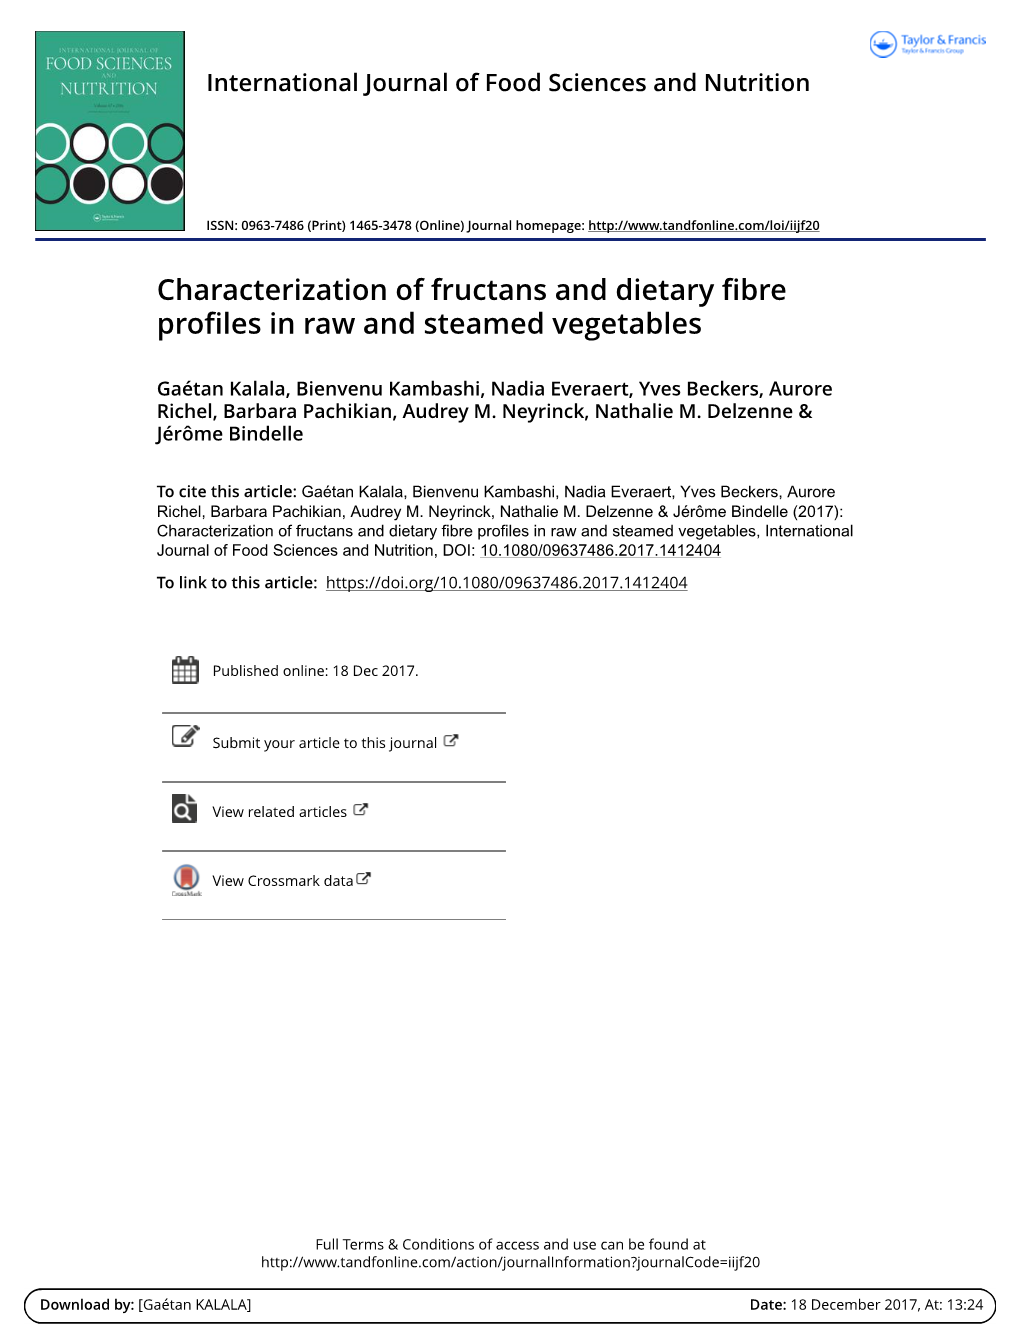 Characterization of Fructans and Dietary Fibre Profiles in Raw and Steamed Vegetables